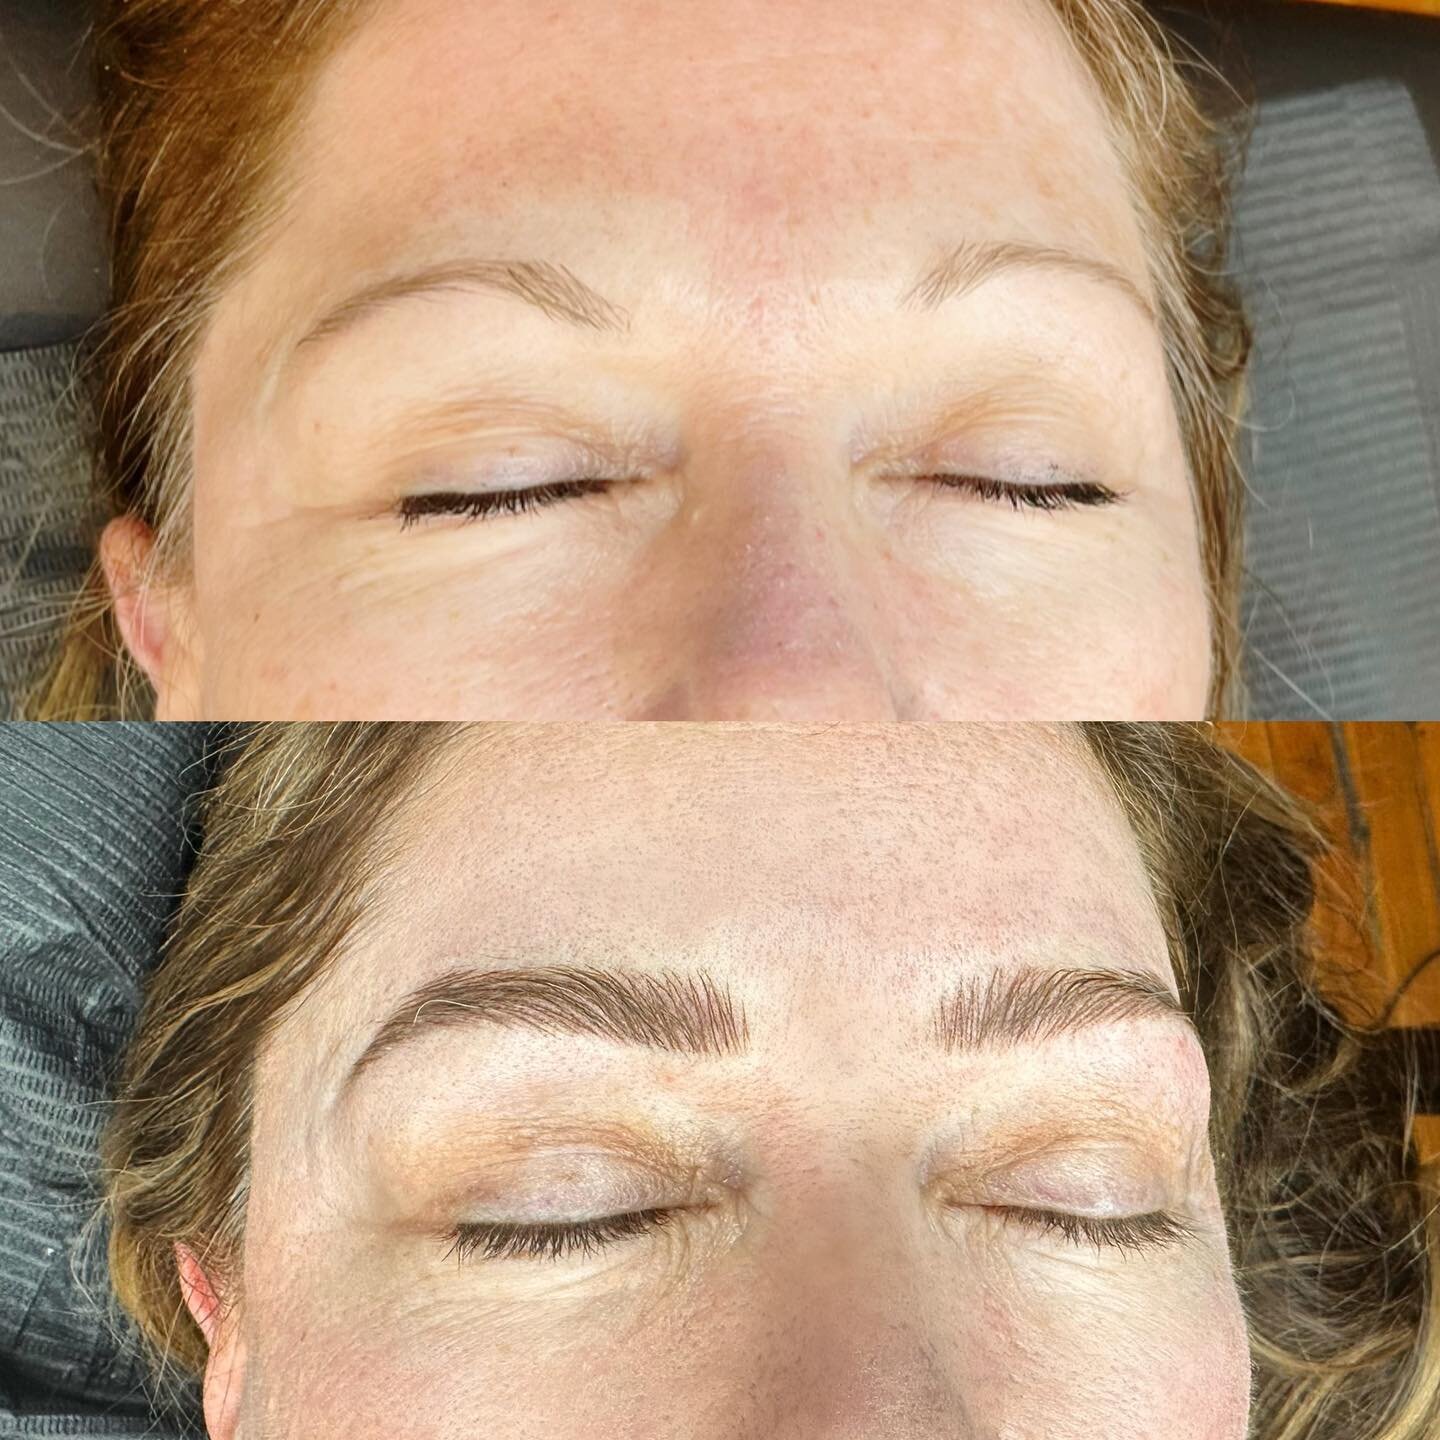 Hello! The only availability I have until I open my books for June is 4/28 at 11:15. I&rsquo;ll post any openings here if I have cancellations!
Microblading had faded quickly on her skin so we decided to switch these brows over to machine hairstrokes